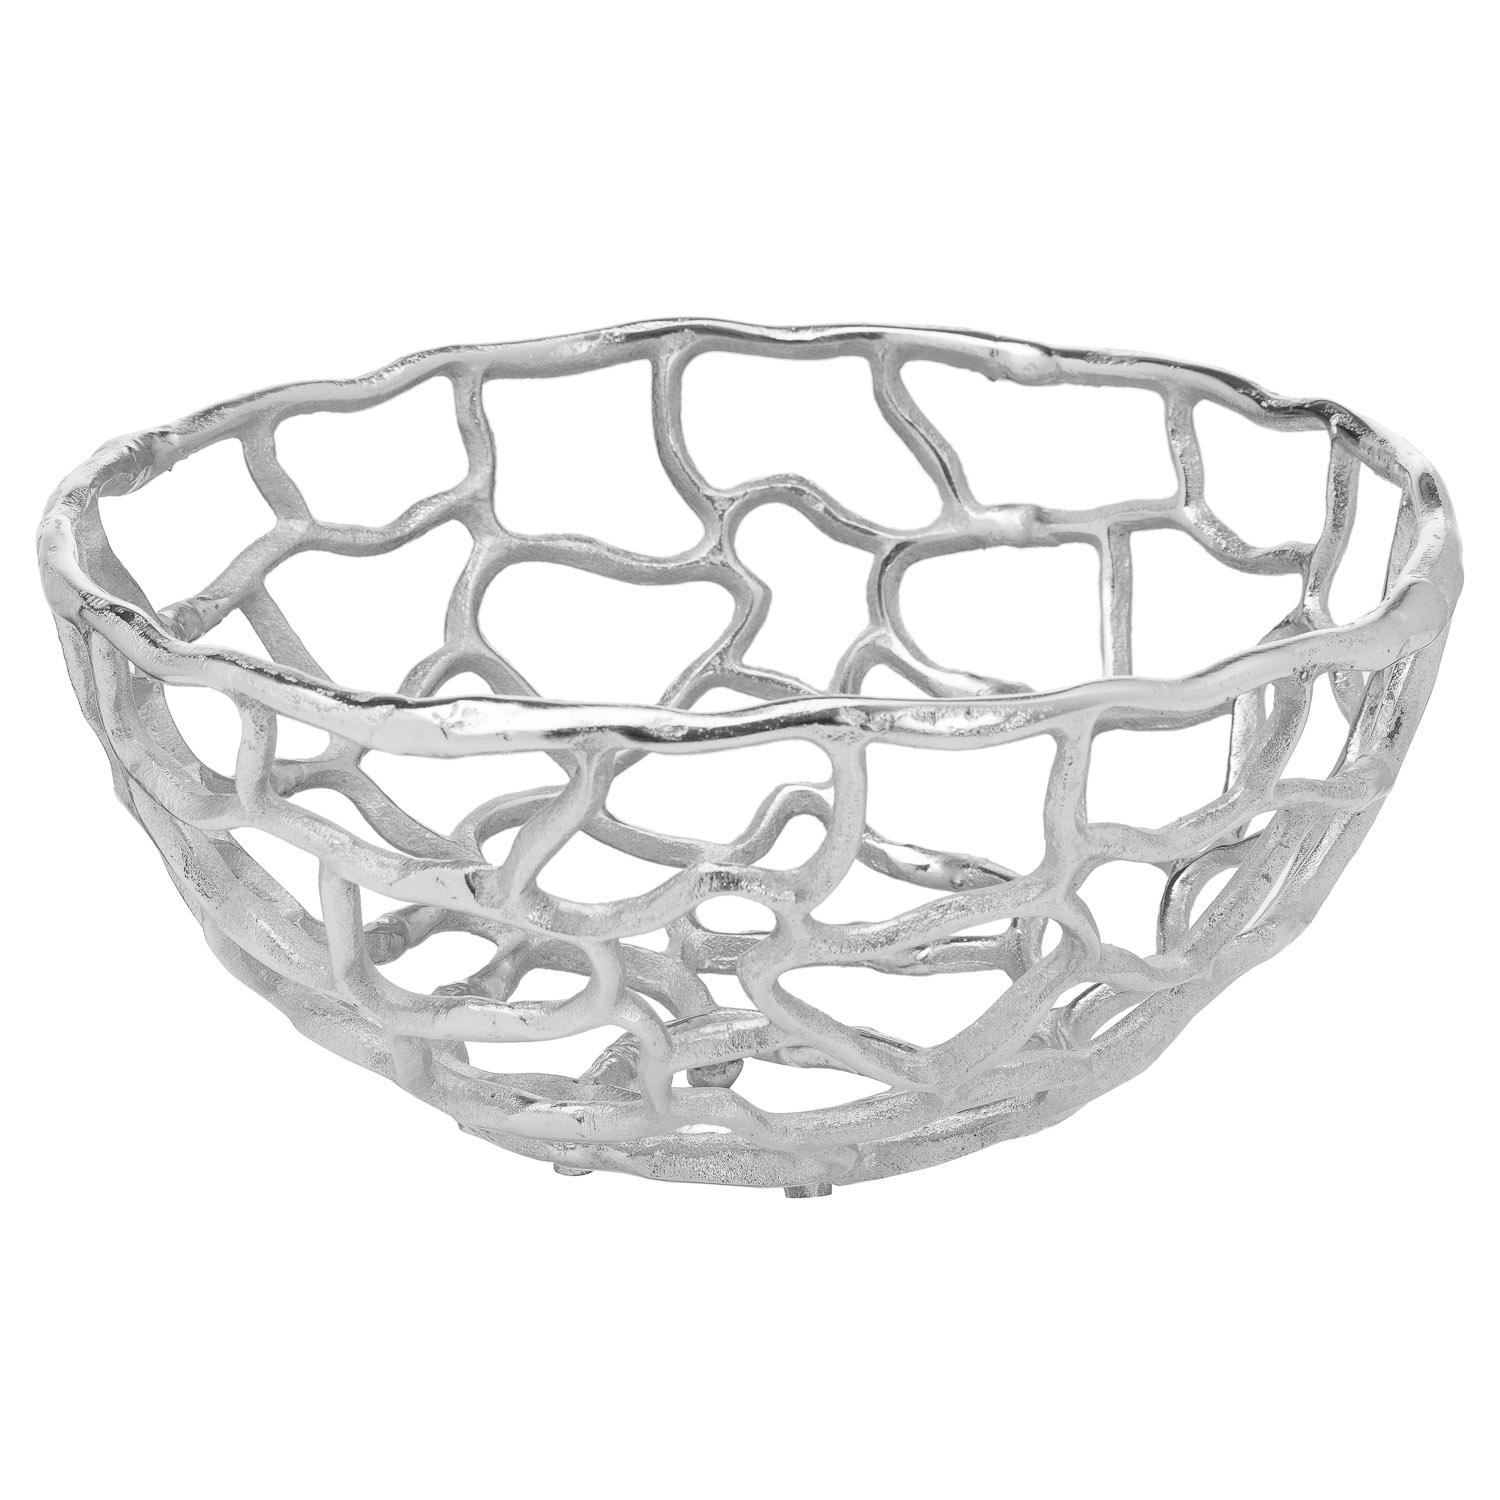 Ohlson Silver Perforated Coral Inspired Bowl Small - Image 1